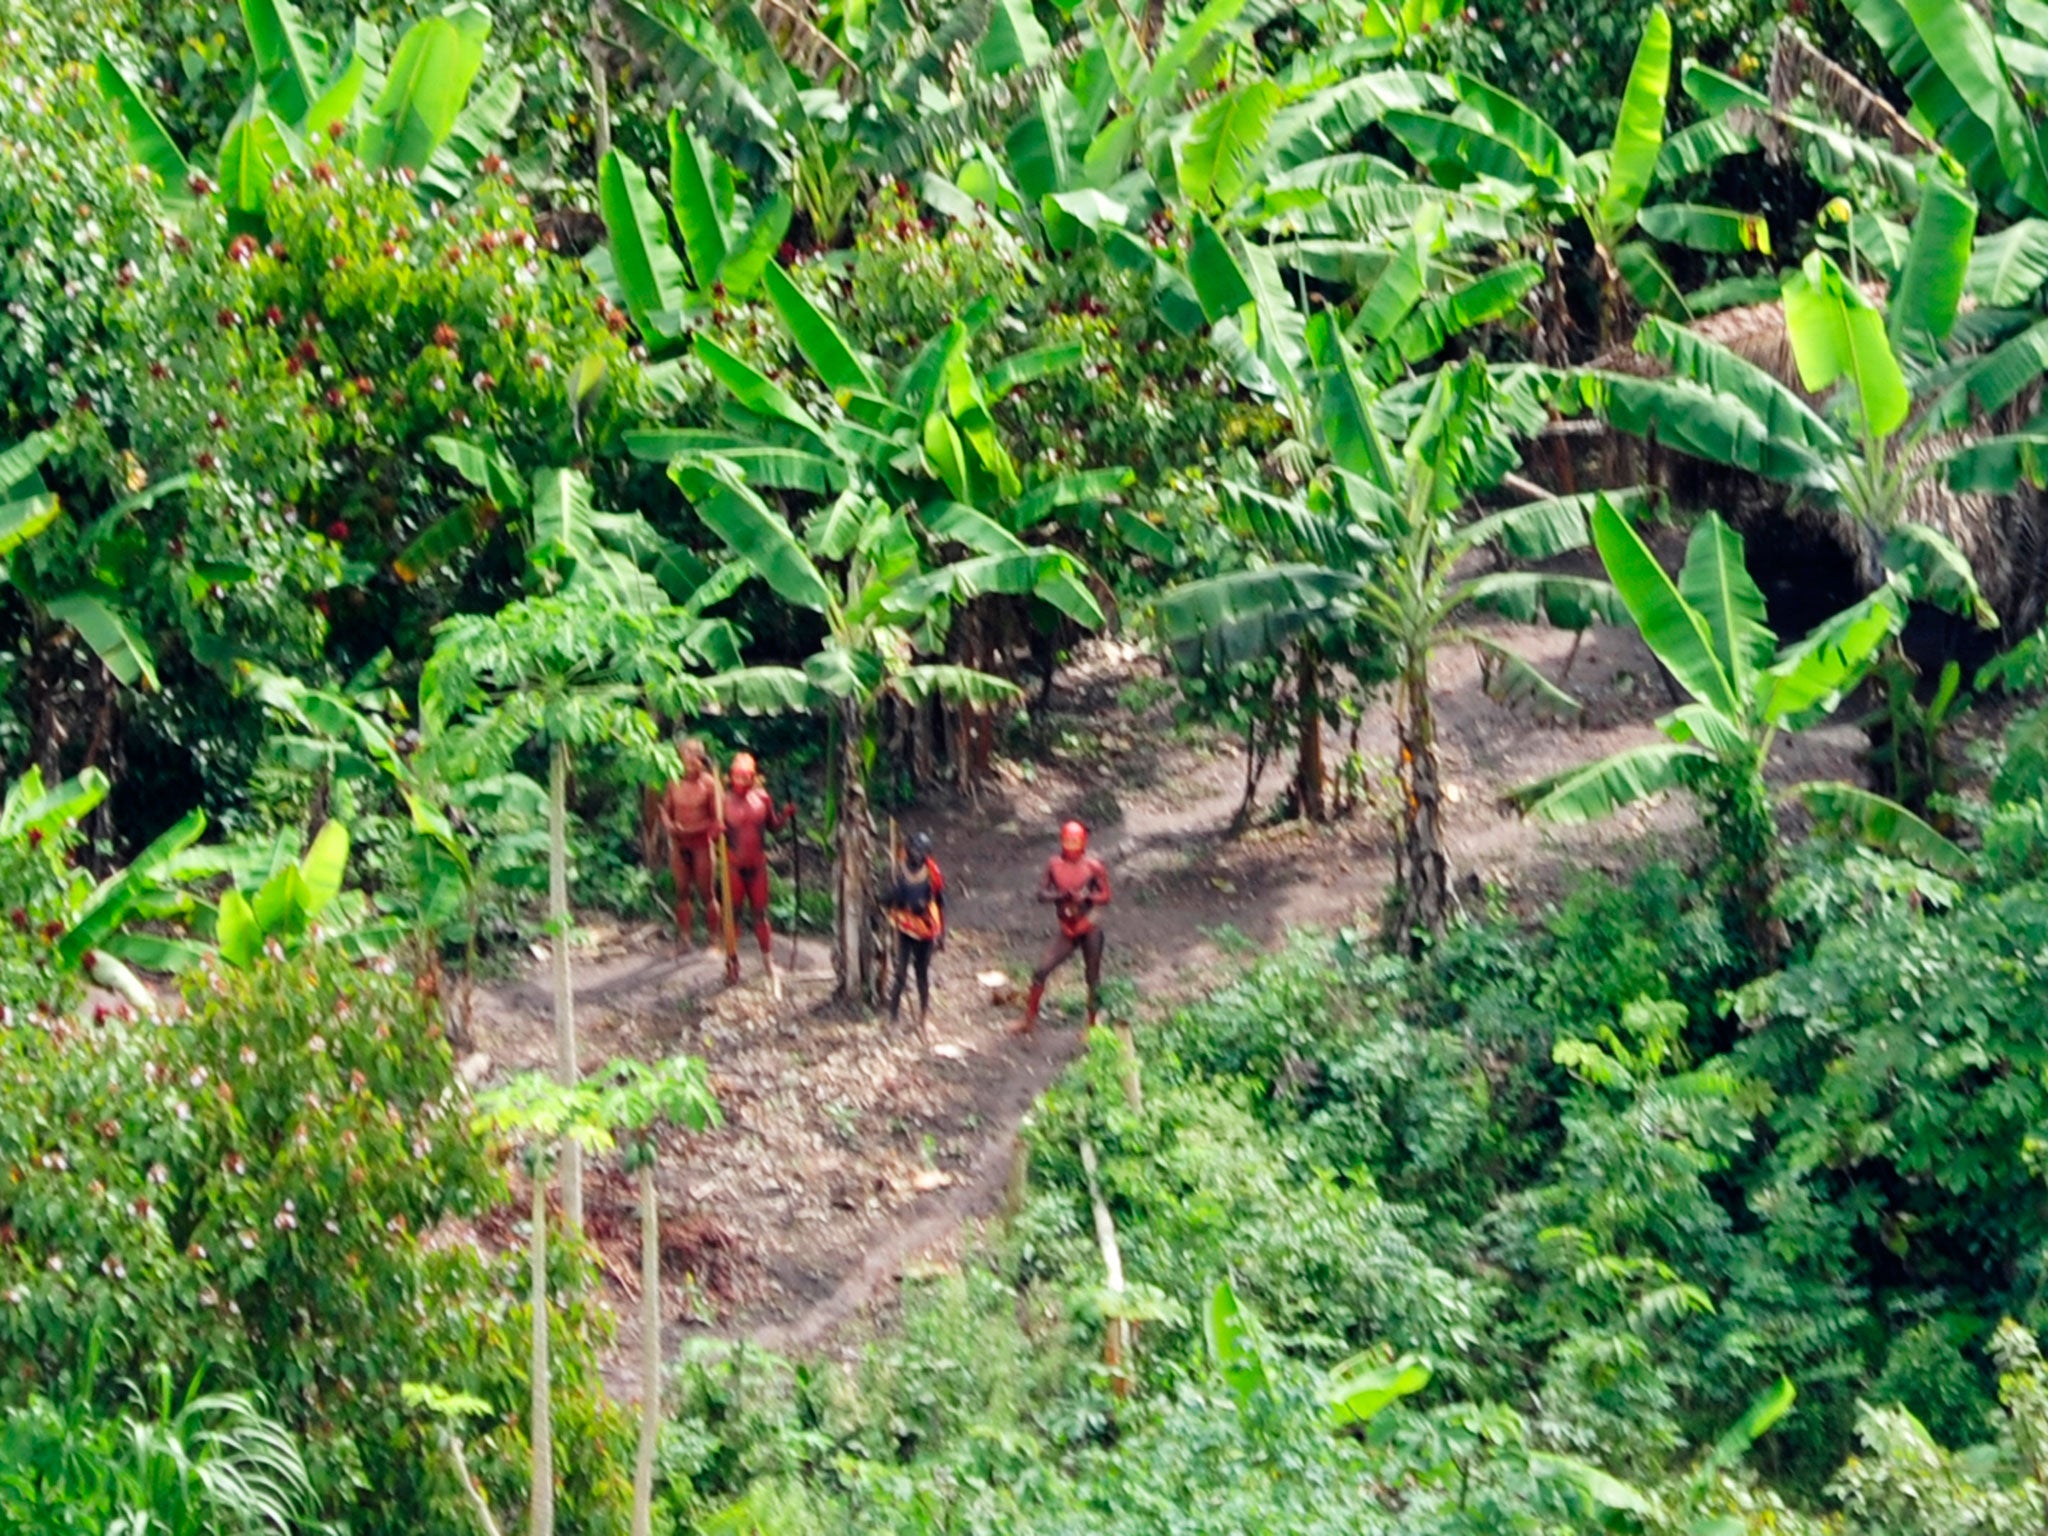 Uncontacted indigenous tribe, photographed from the air